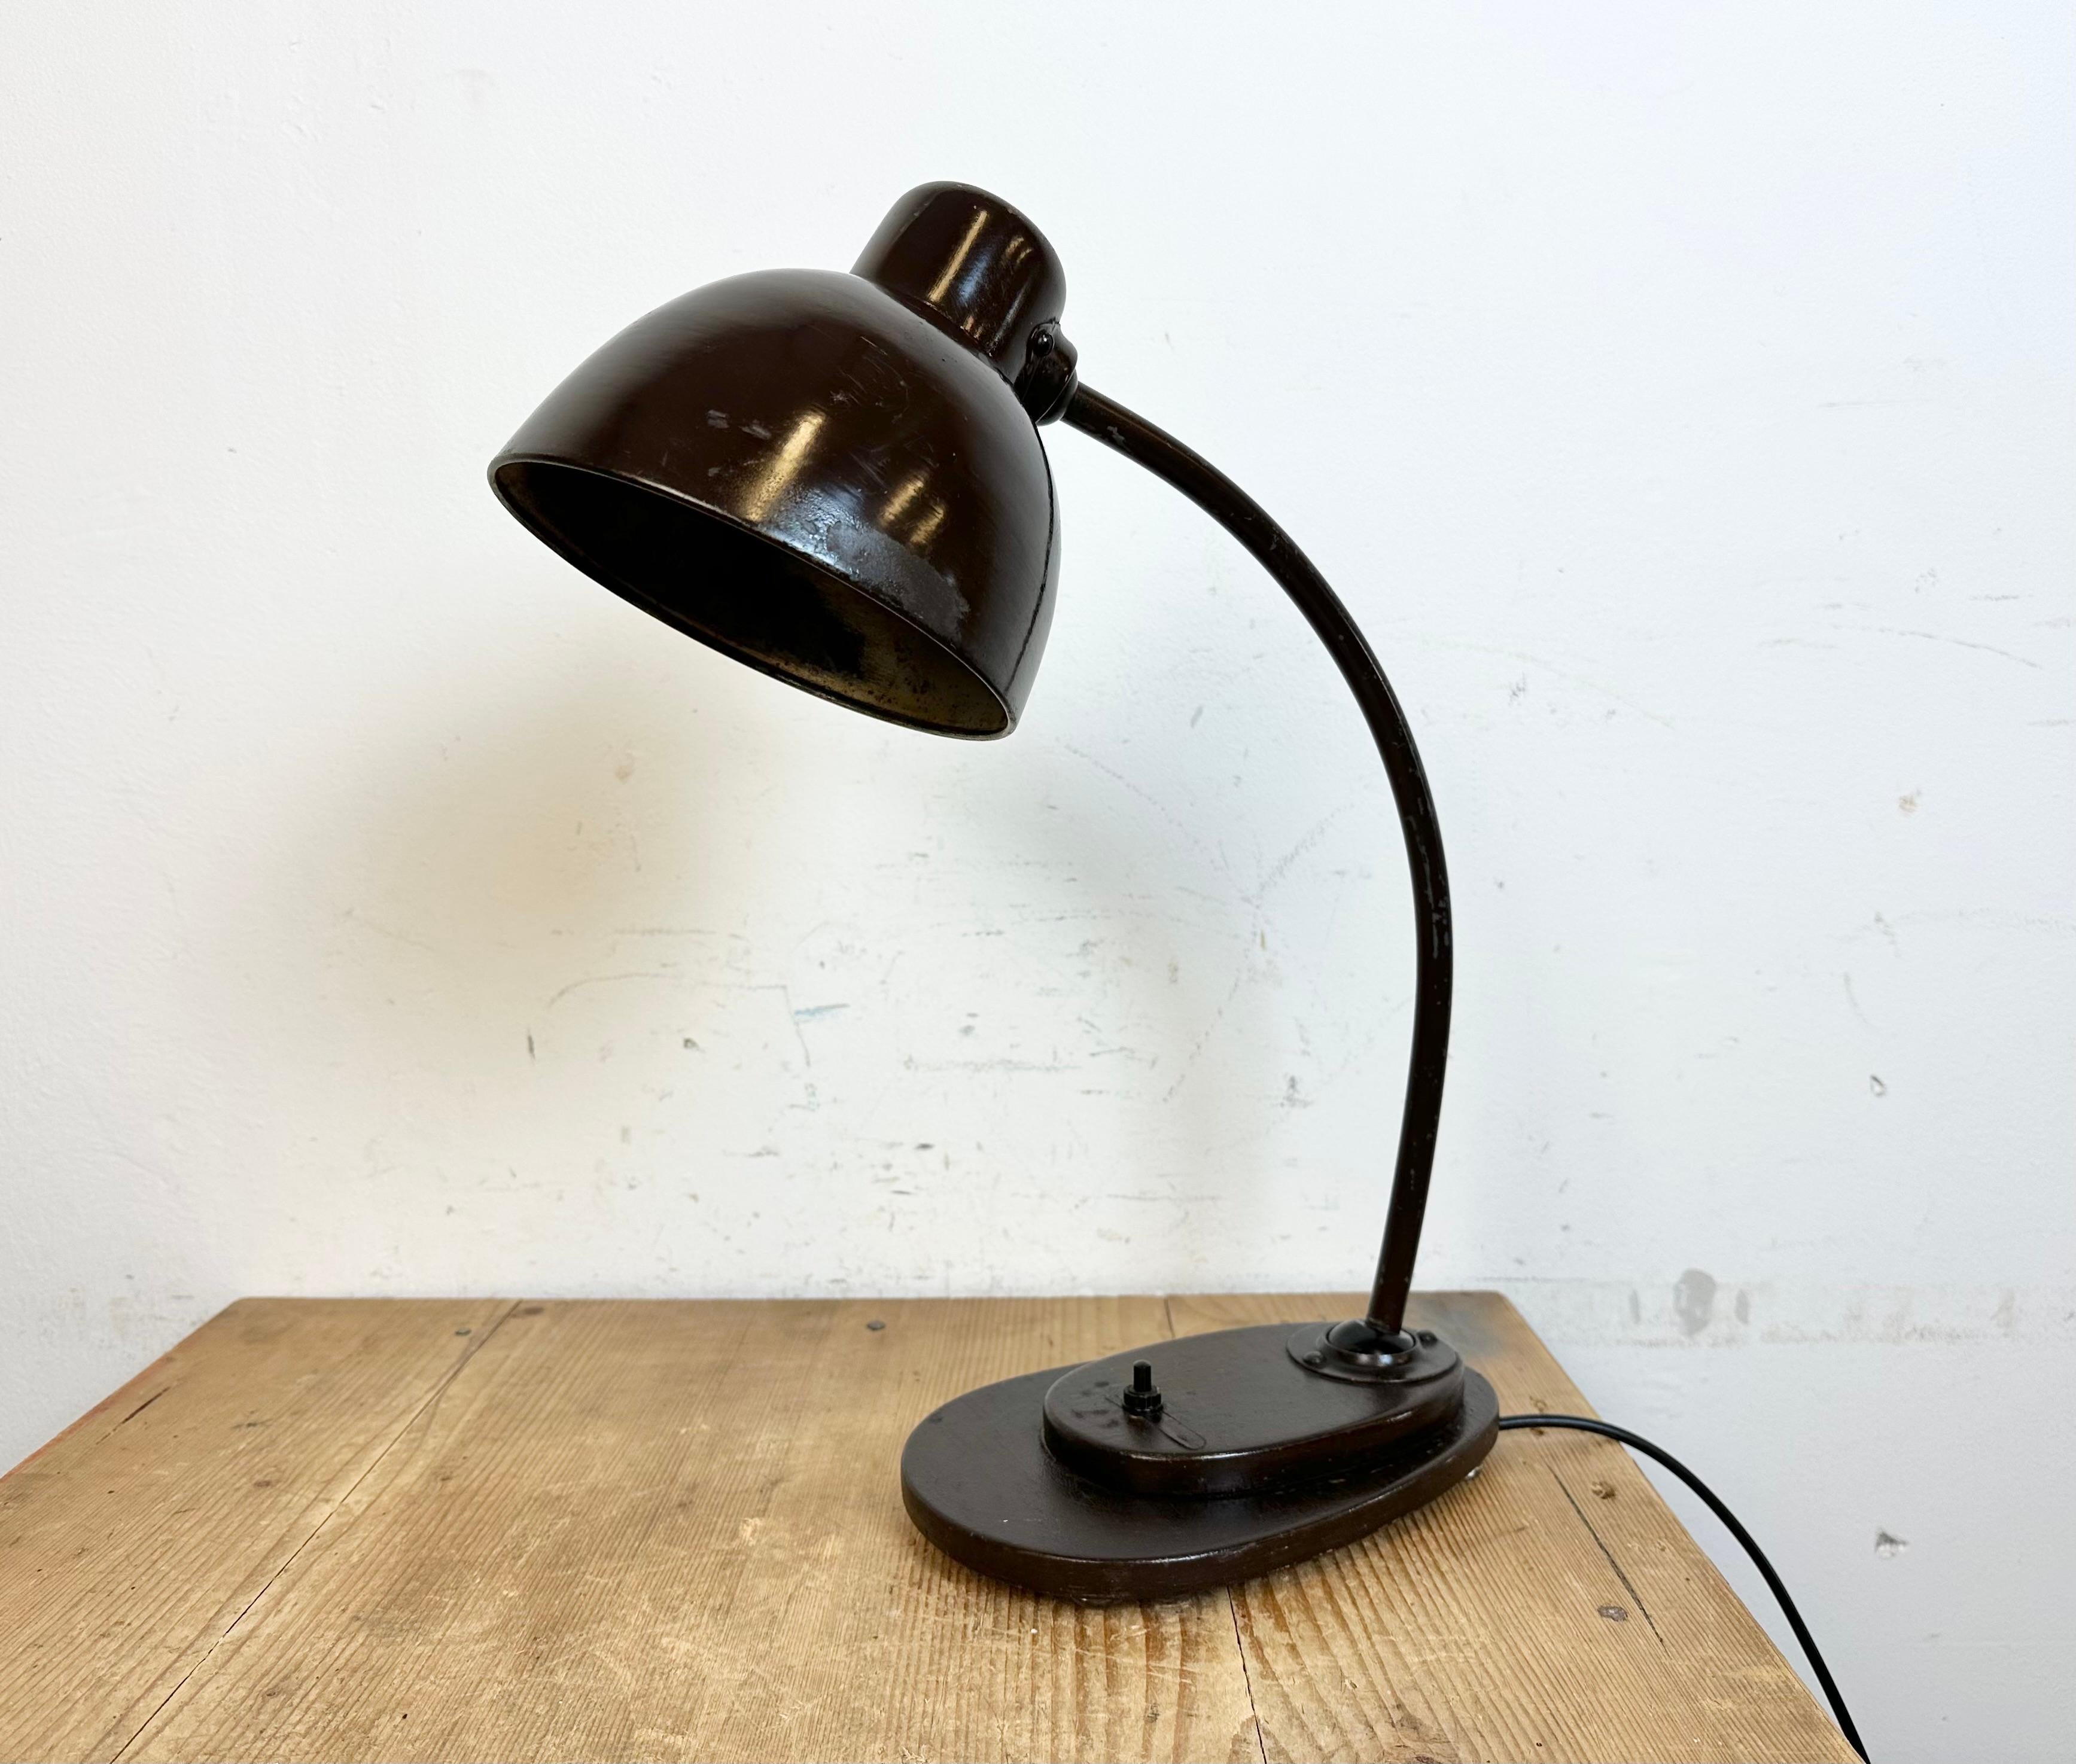 This dark brown  industrial desk lamp was made in former Czechoslovakia during the 1960s. The lamp has an aluminium shade, a wooden base and iron arm with two adjustable joints. Original bakelite socket requires standard E 27/ E26lightbulbs. New